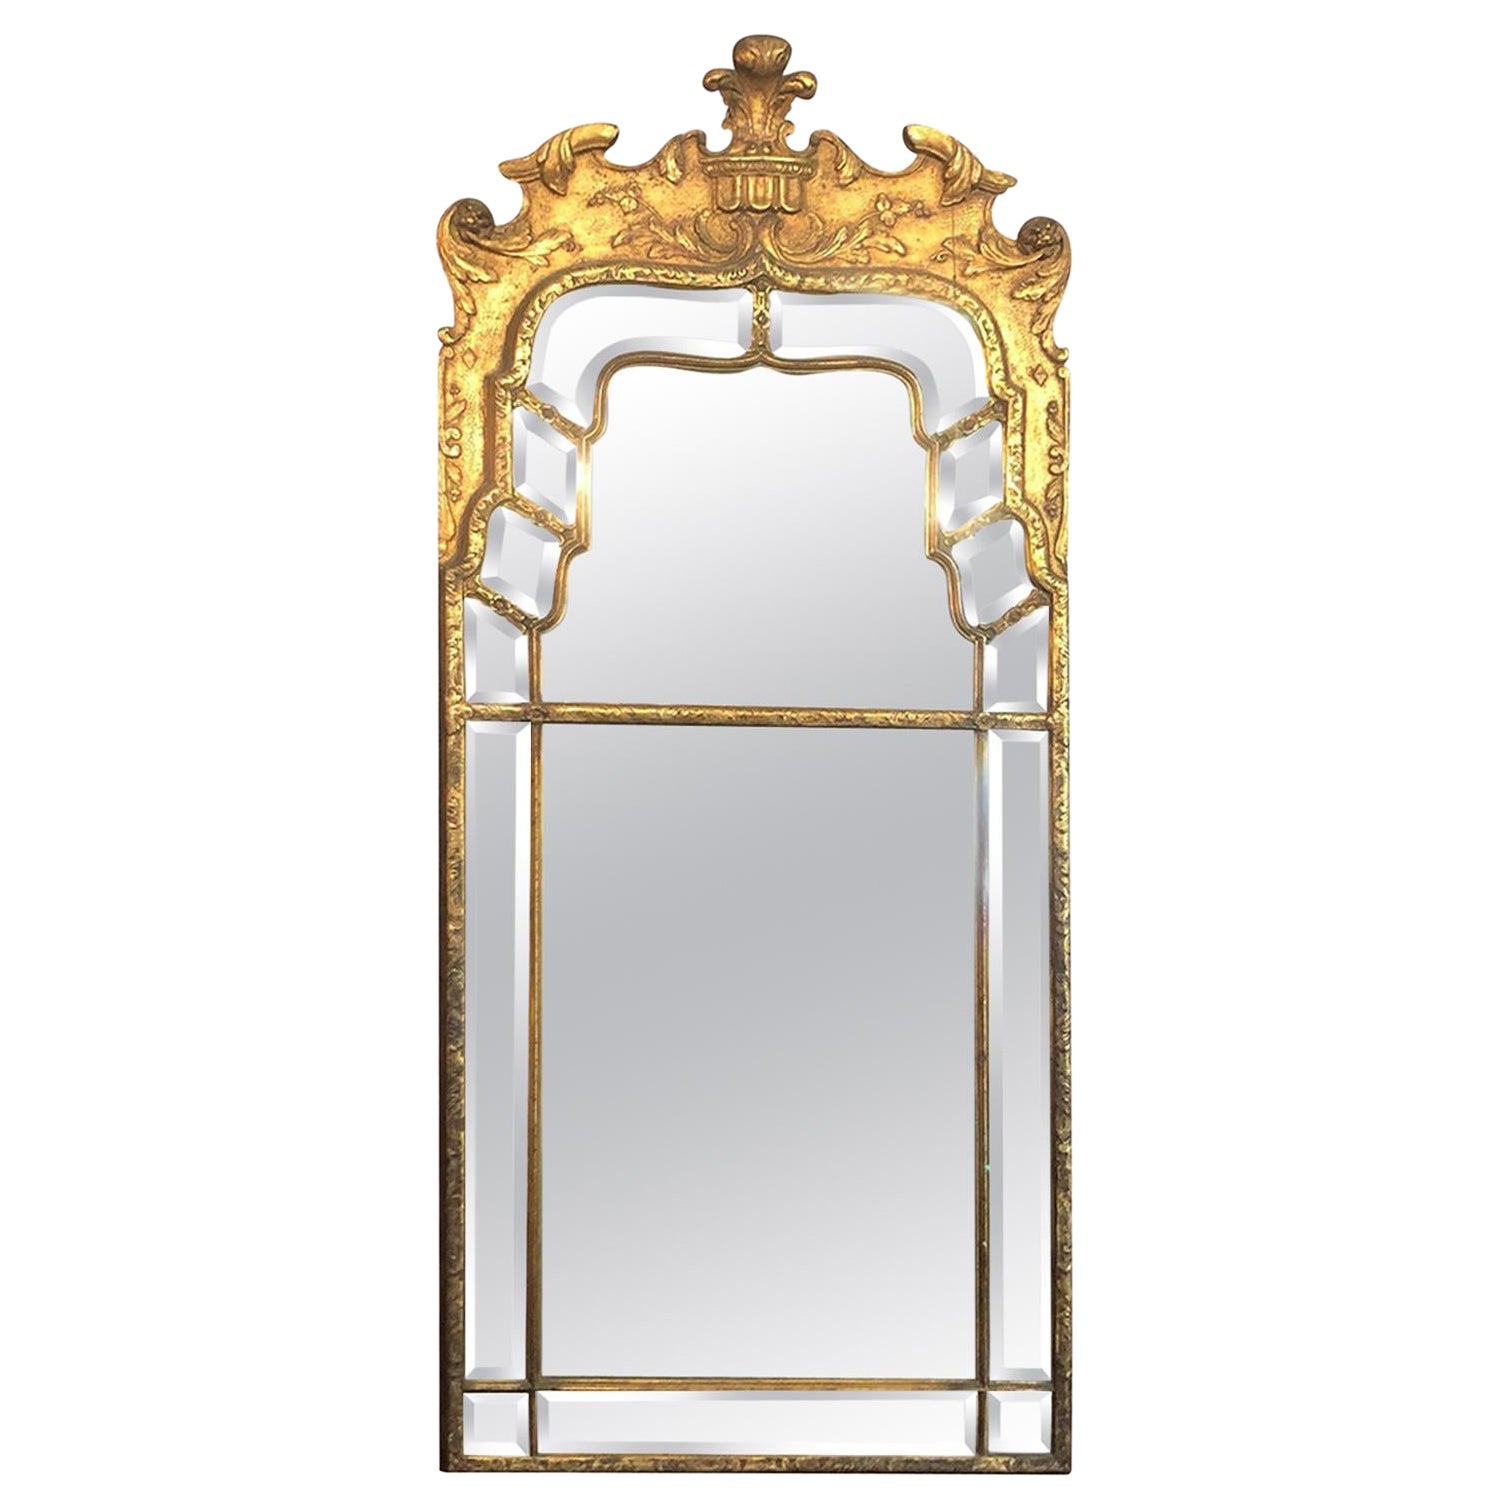 Antique Chinoiserie Gold Mirror with Fine Beveling